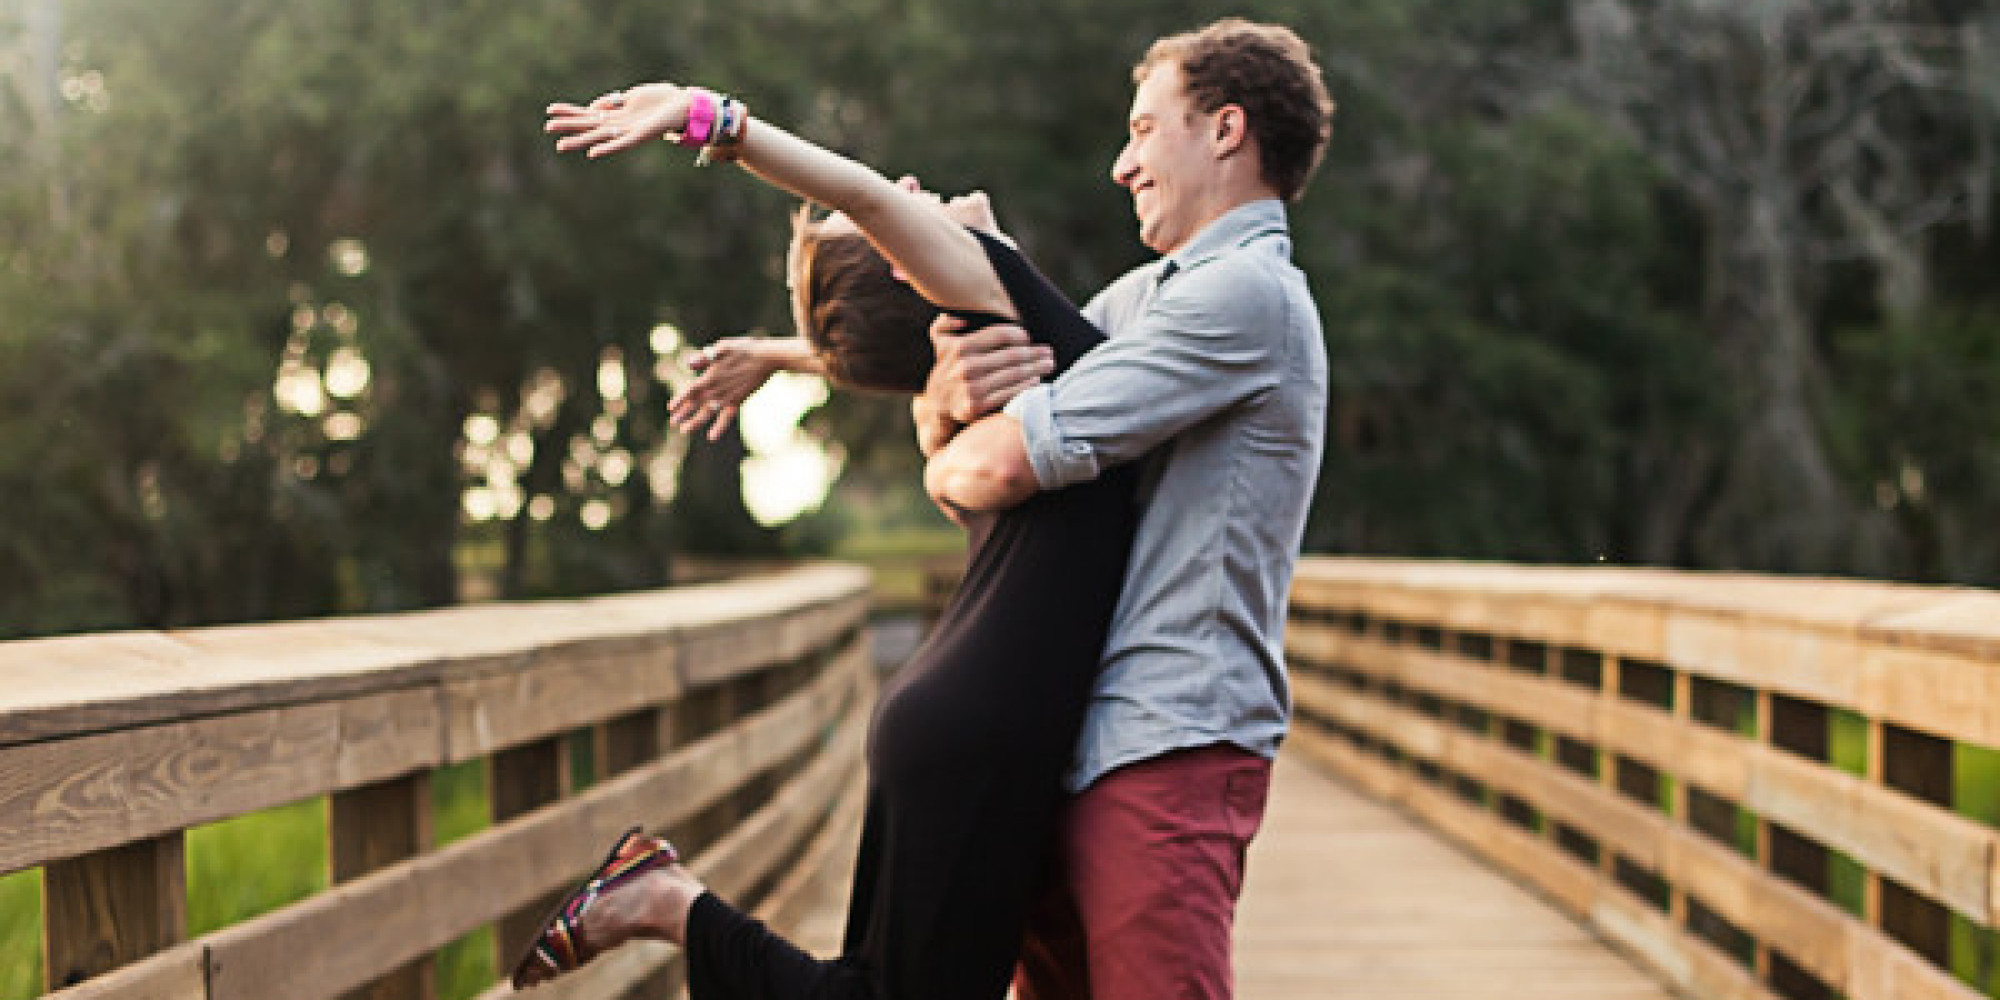 These Proposal Photos Will Turn Your Heart To Mush Huffpost